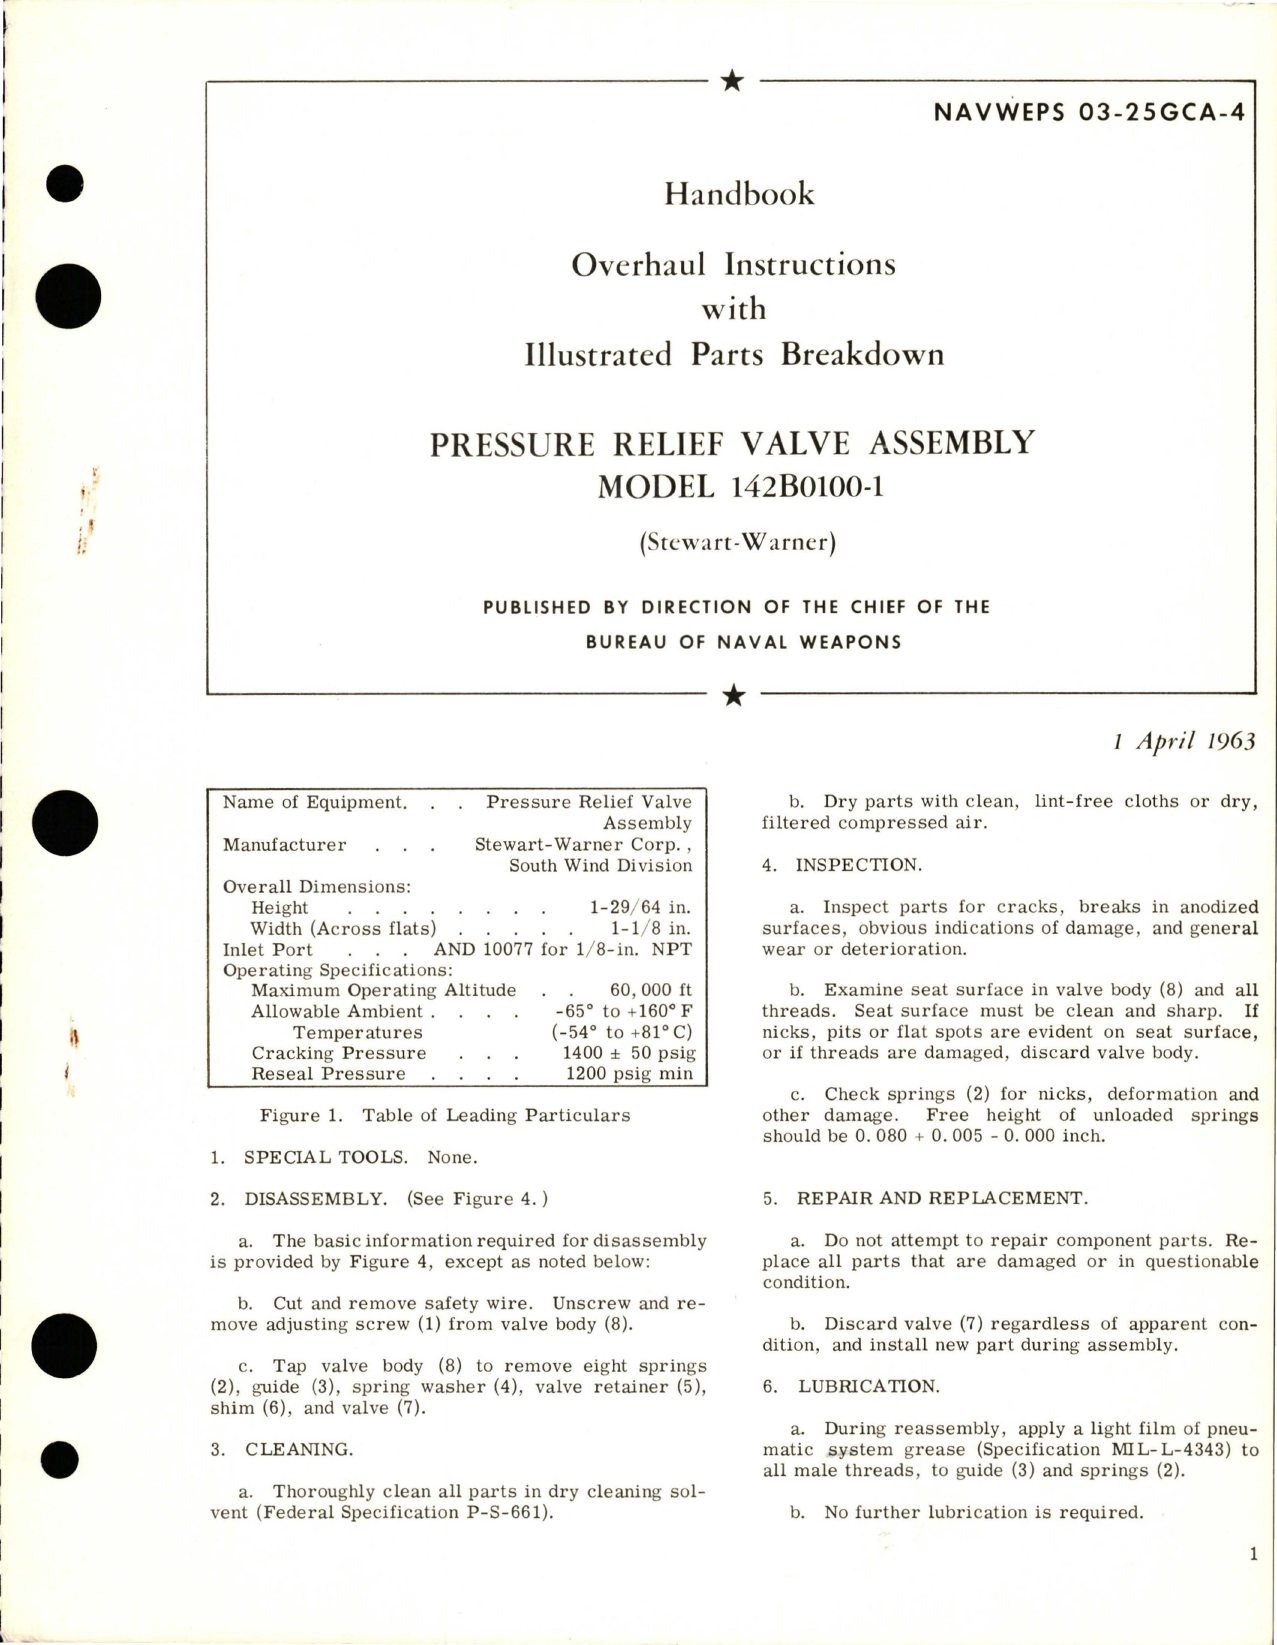 Sample page 1 from AirCorps Library document: Overhaul Instructions with Parts Breakdown for Pressure Relief Valve Assembly - Model 142B0100-1